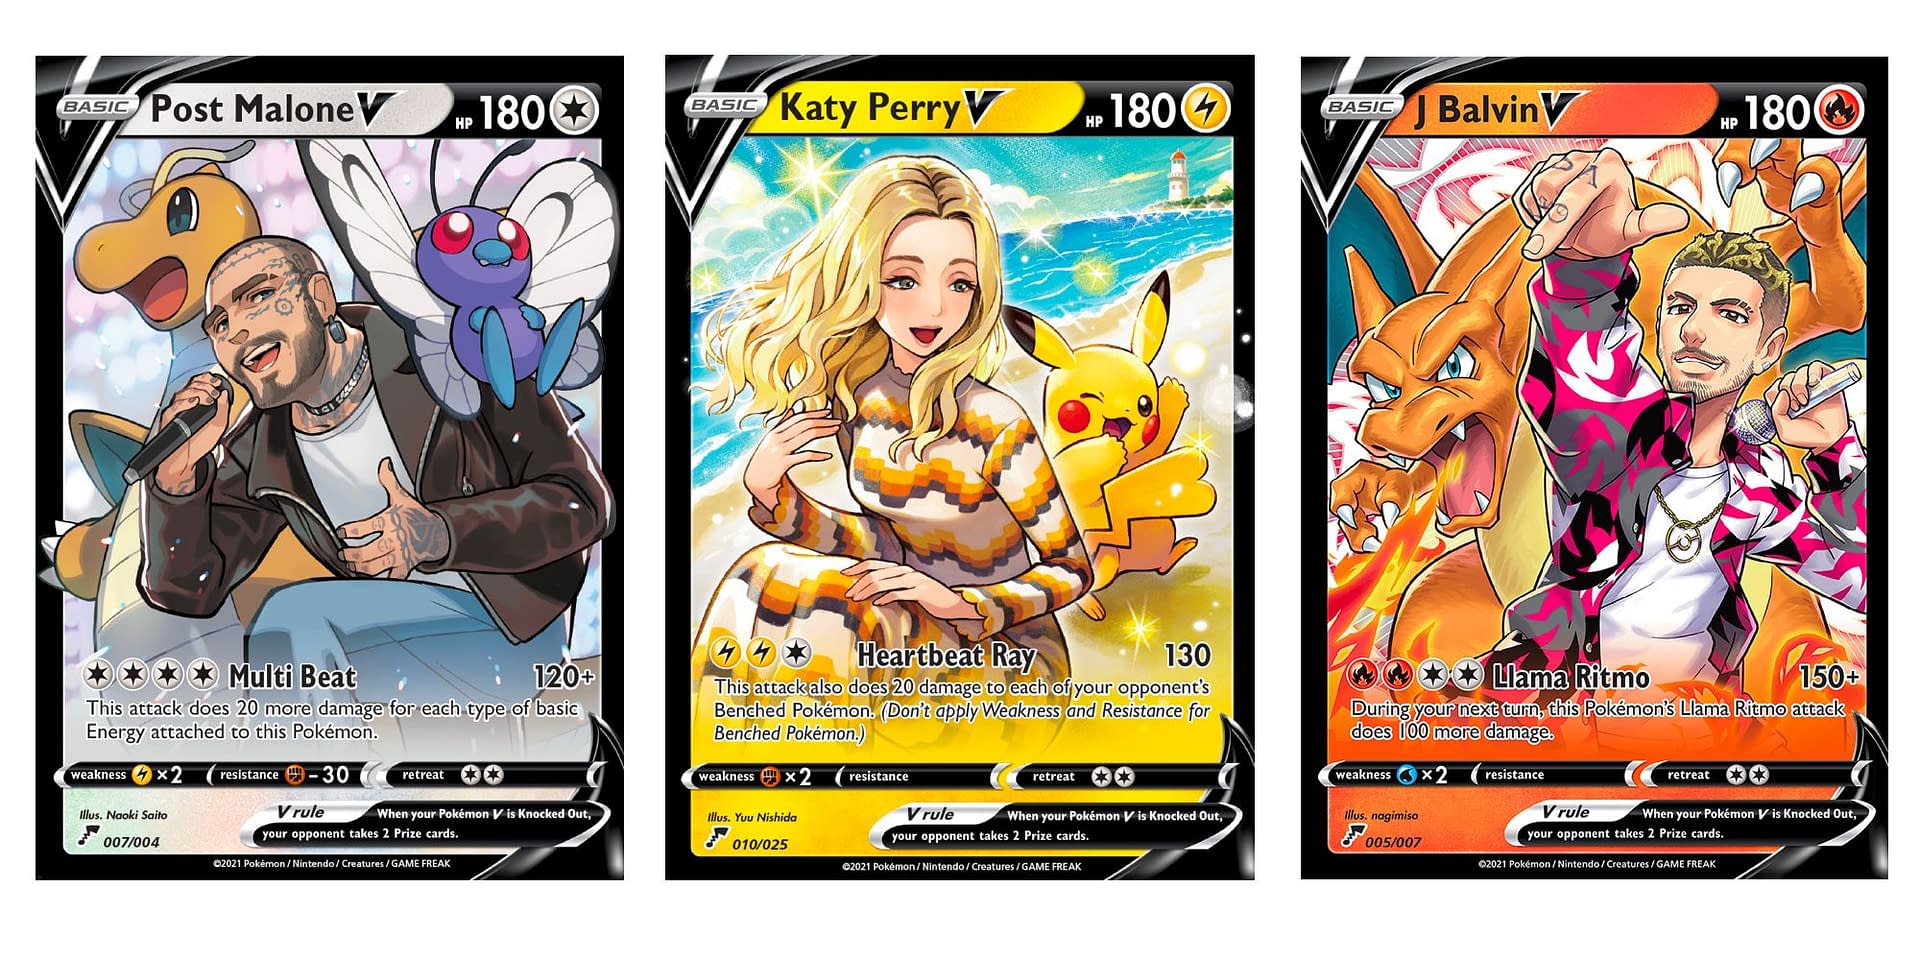 Pokémon TCG Will Release Katy Perry, Post Malone Cards